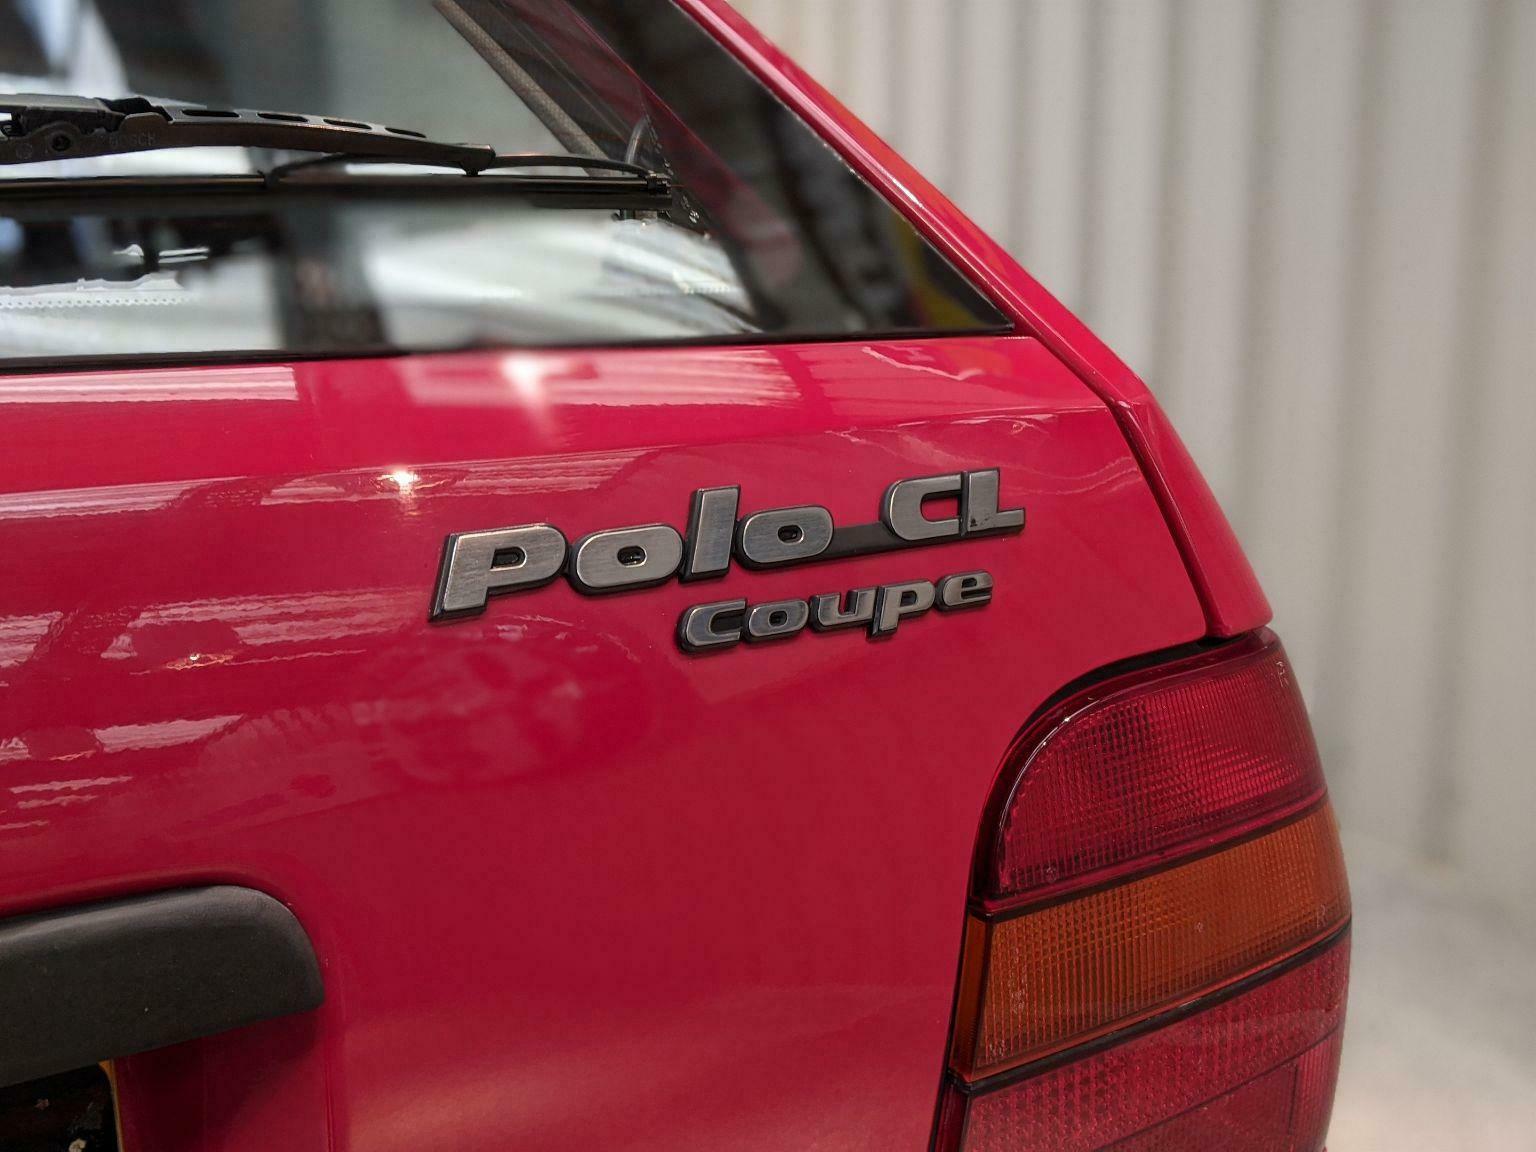 1991 Volkswagen Polo Coupe badge